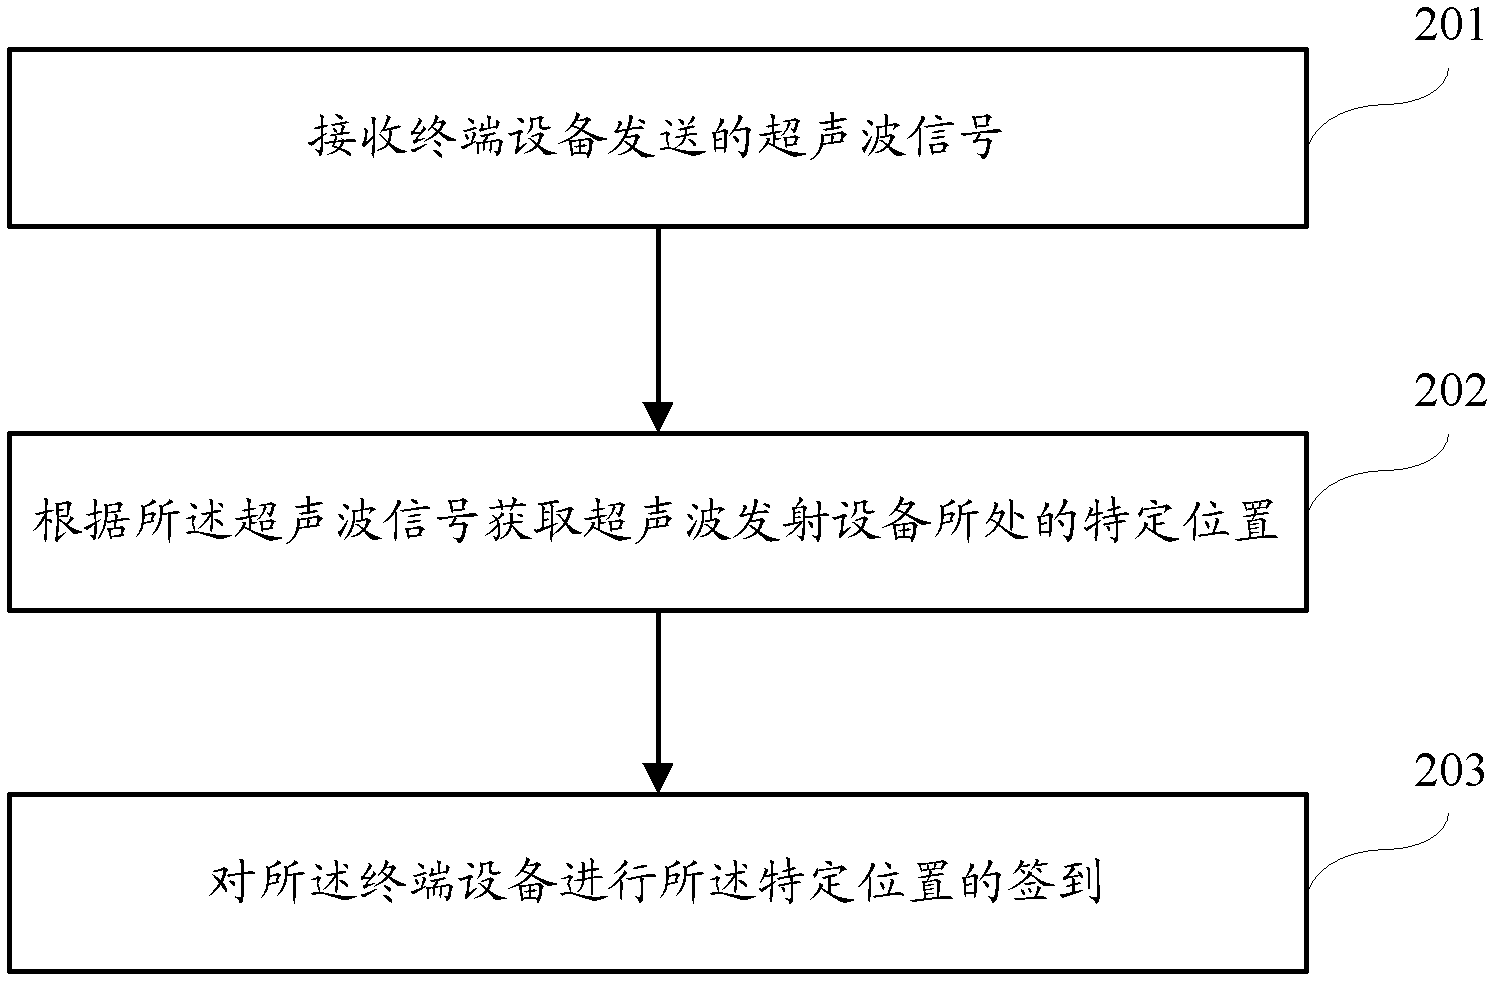 Terminal equipment, data server, sign-in method, sign-in processing method and system